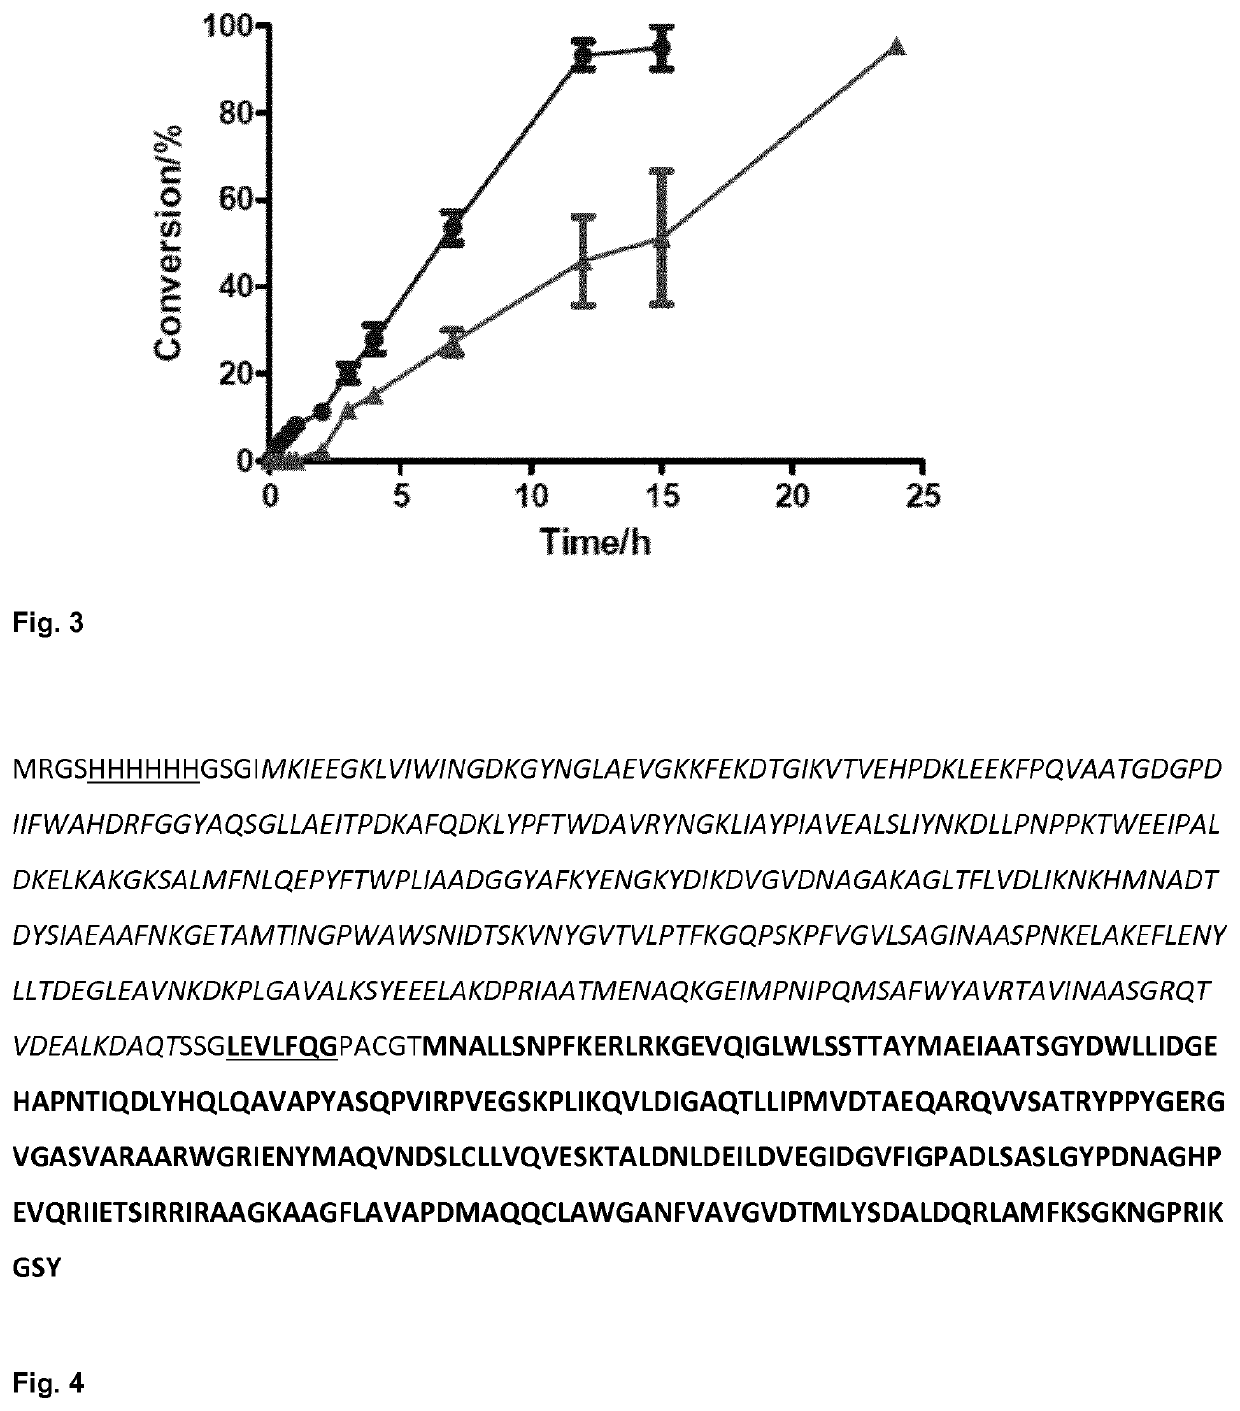 Fusion proteins comprising an aldolase enzyme joined to a maltose binding protein